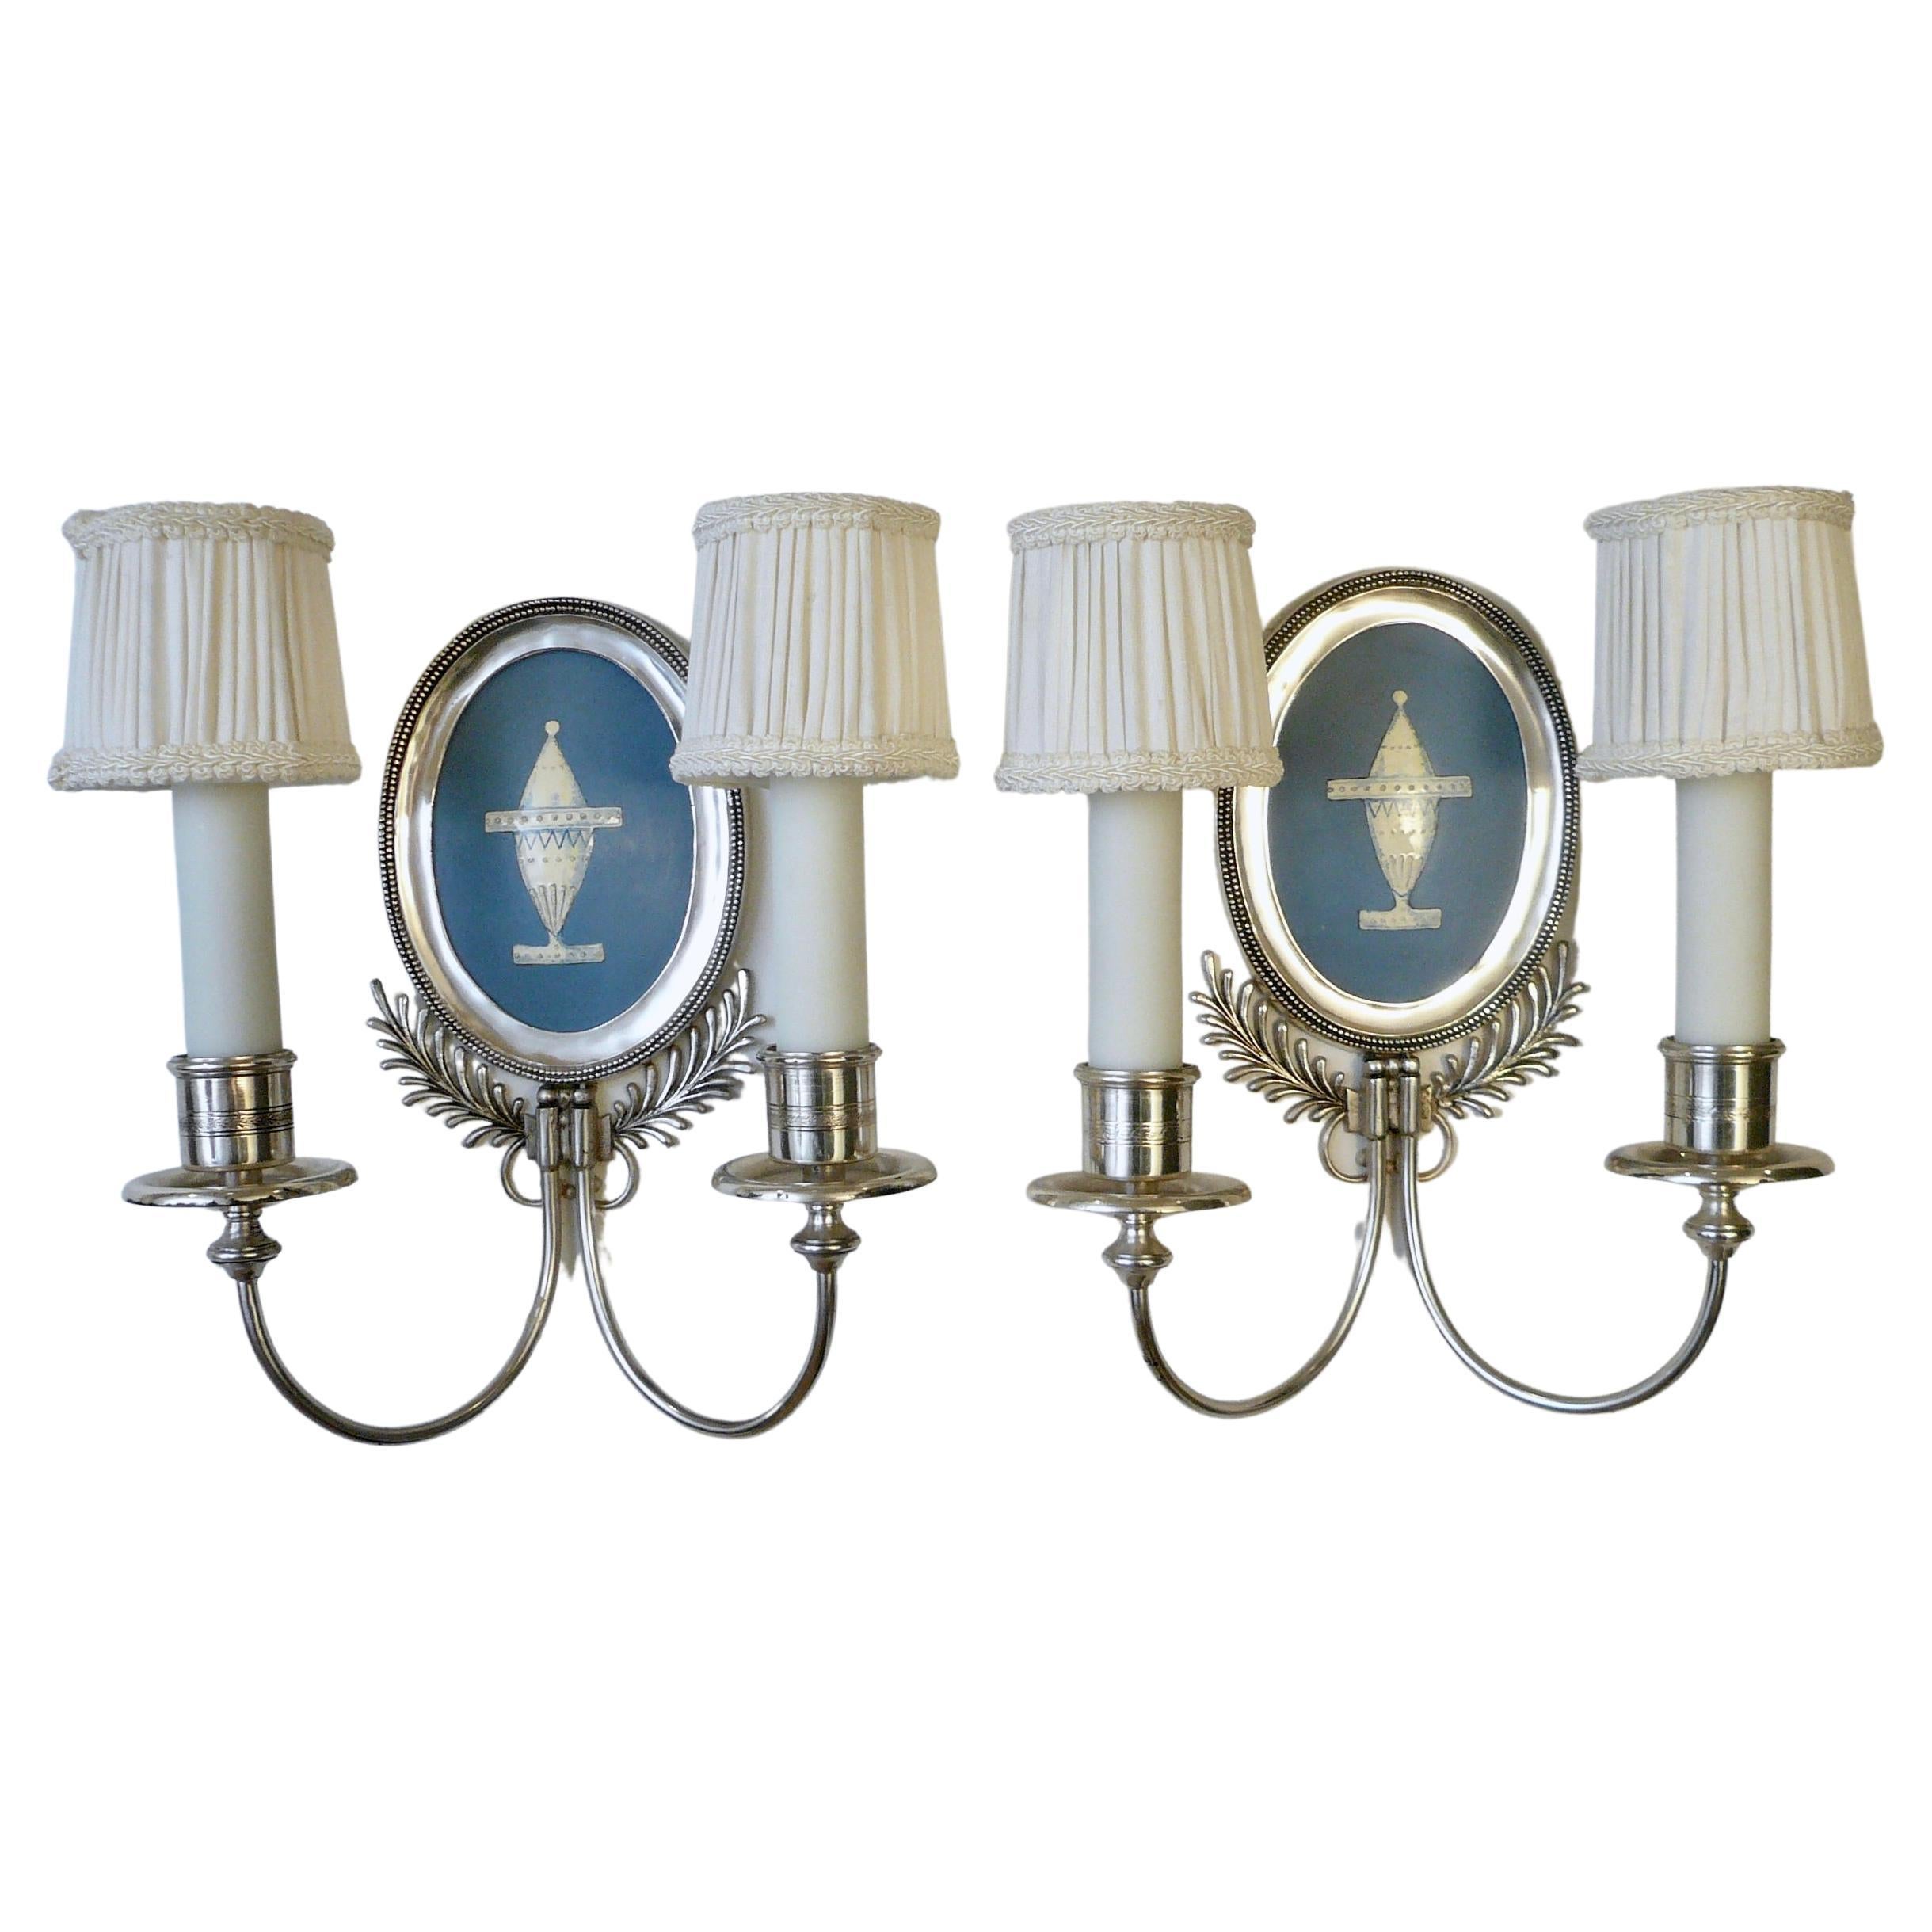 Pair Signed E. F. Caldwell Silver and Wedgwood Blue Enamel on Copper Sconces